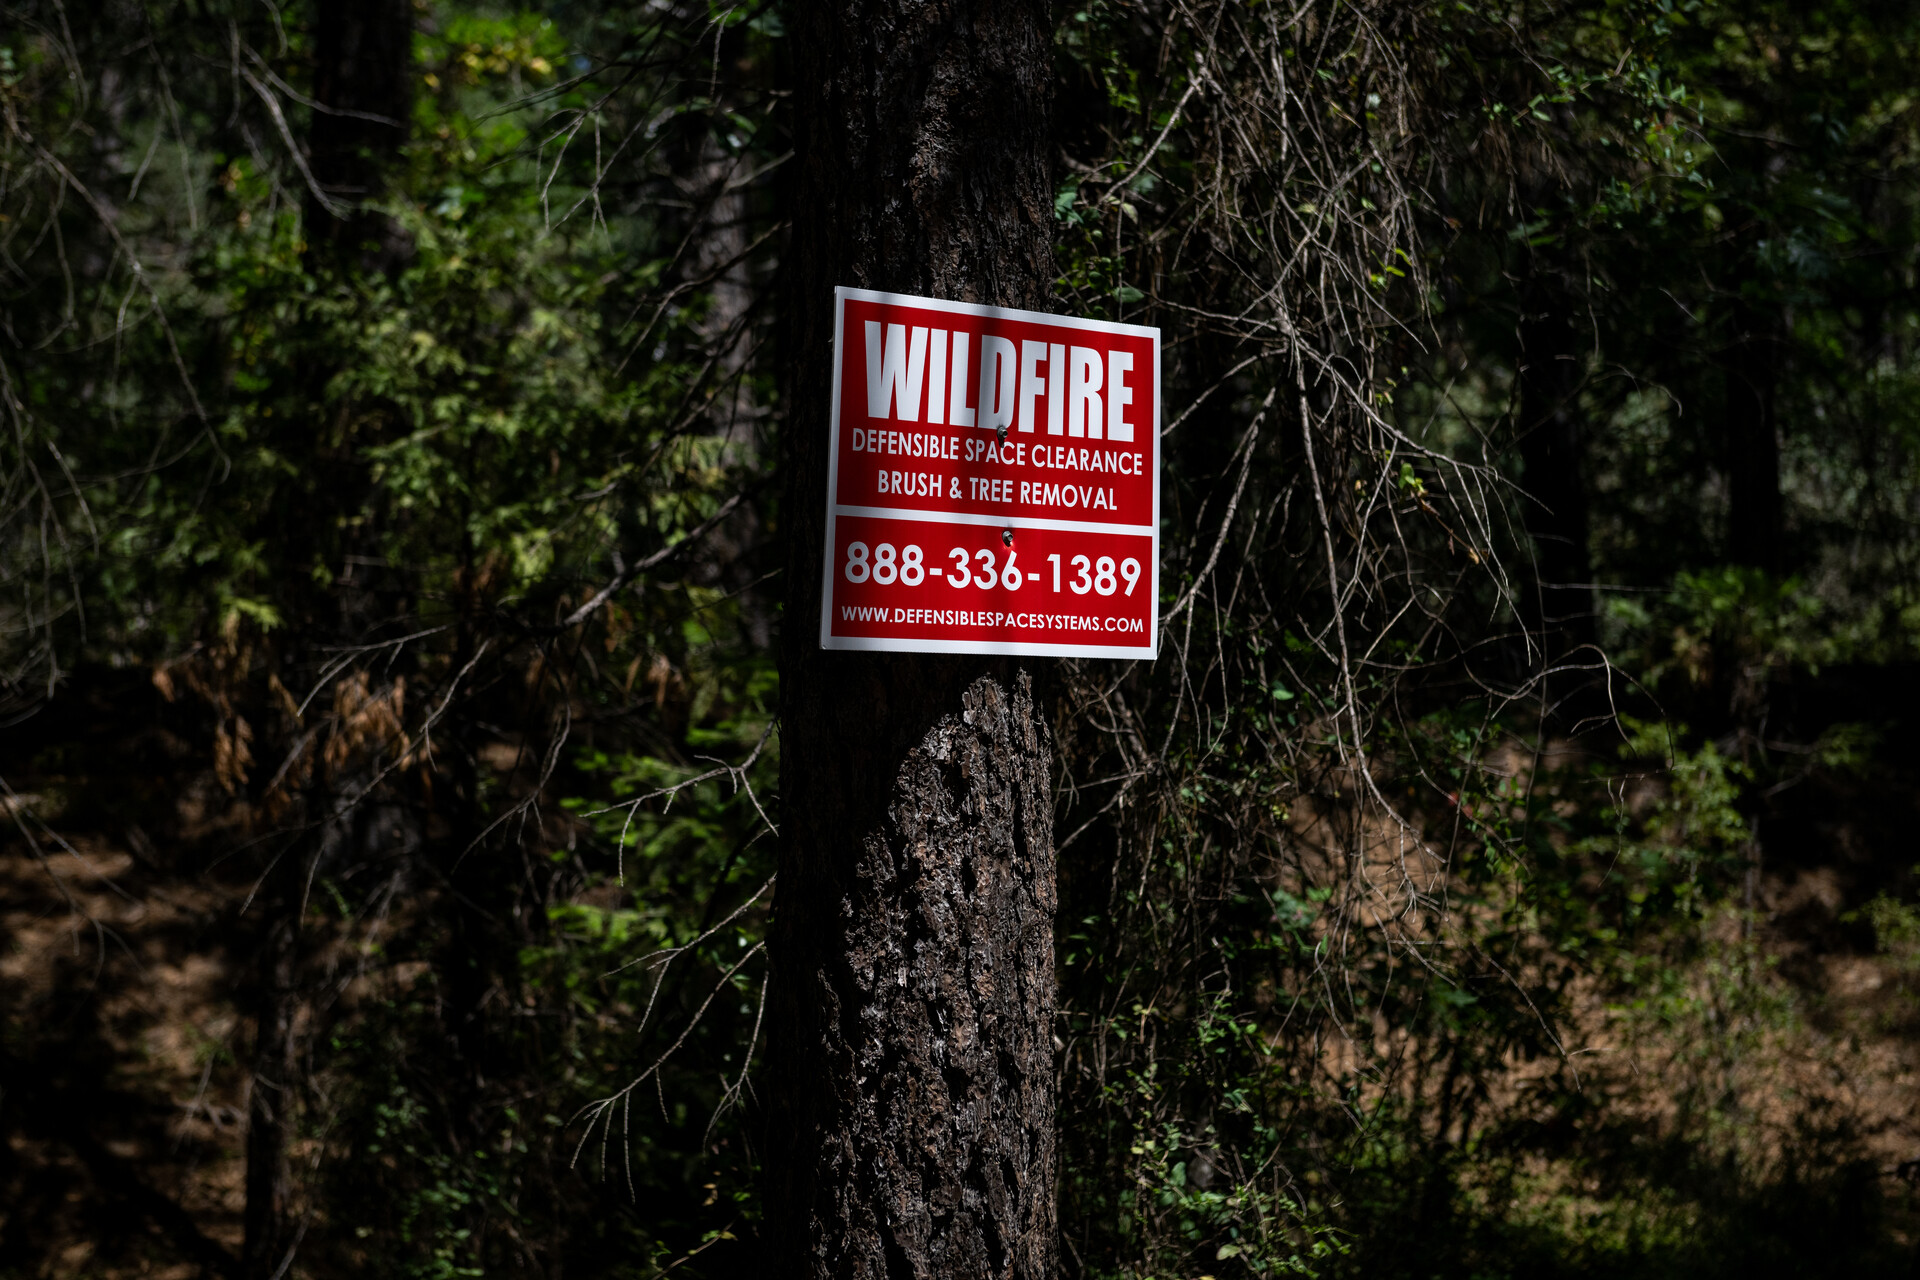 A red sign with white lettering is nailed to a tree.